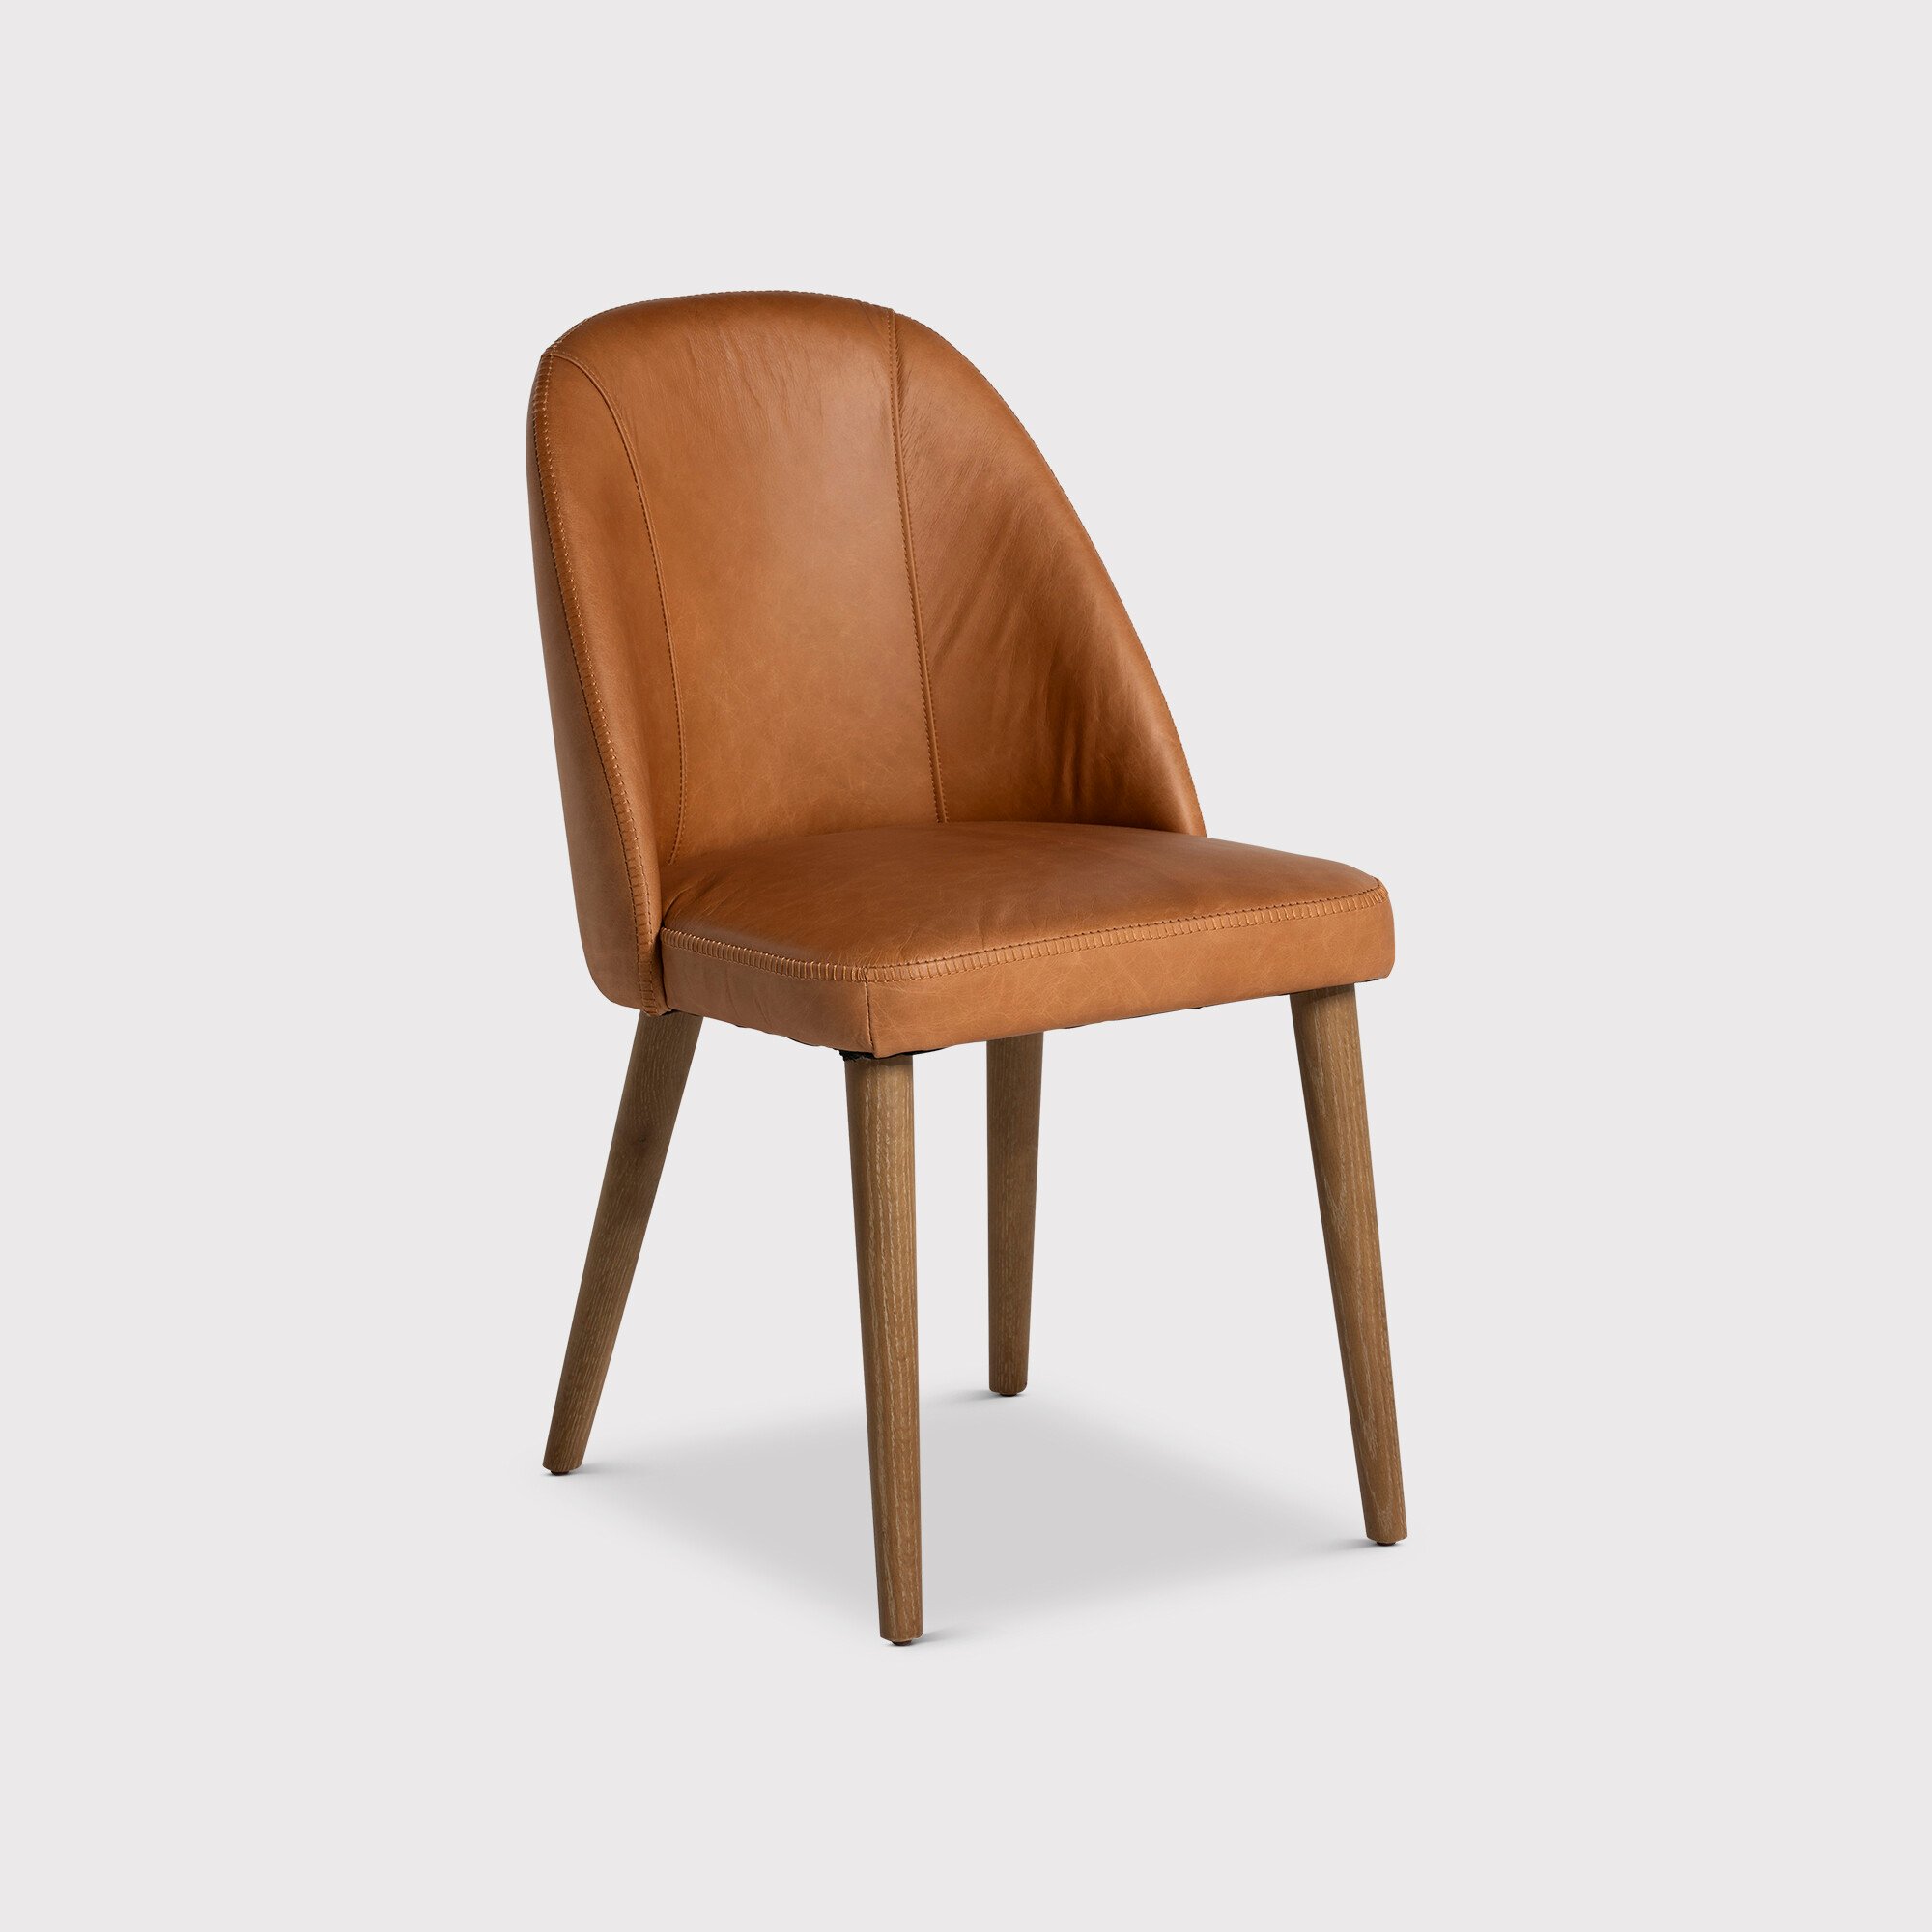 Rogan Dining Chair Leather | Barker & Stonehouse